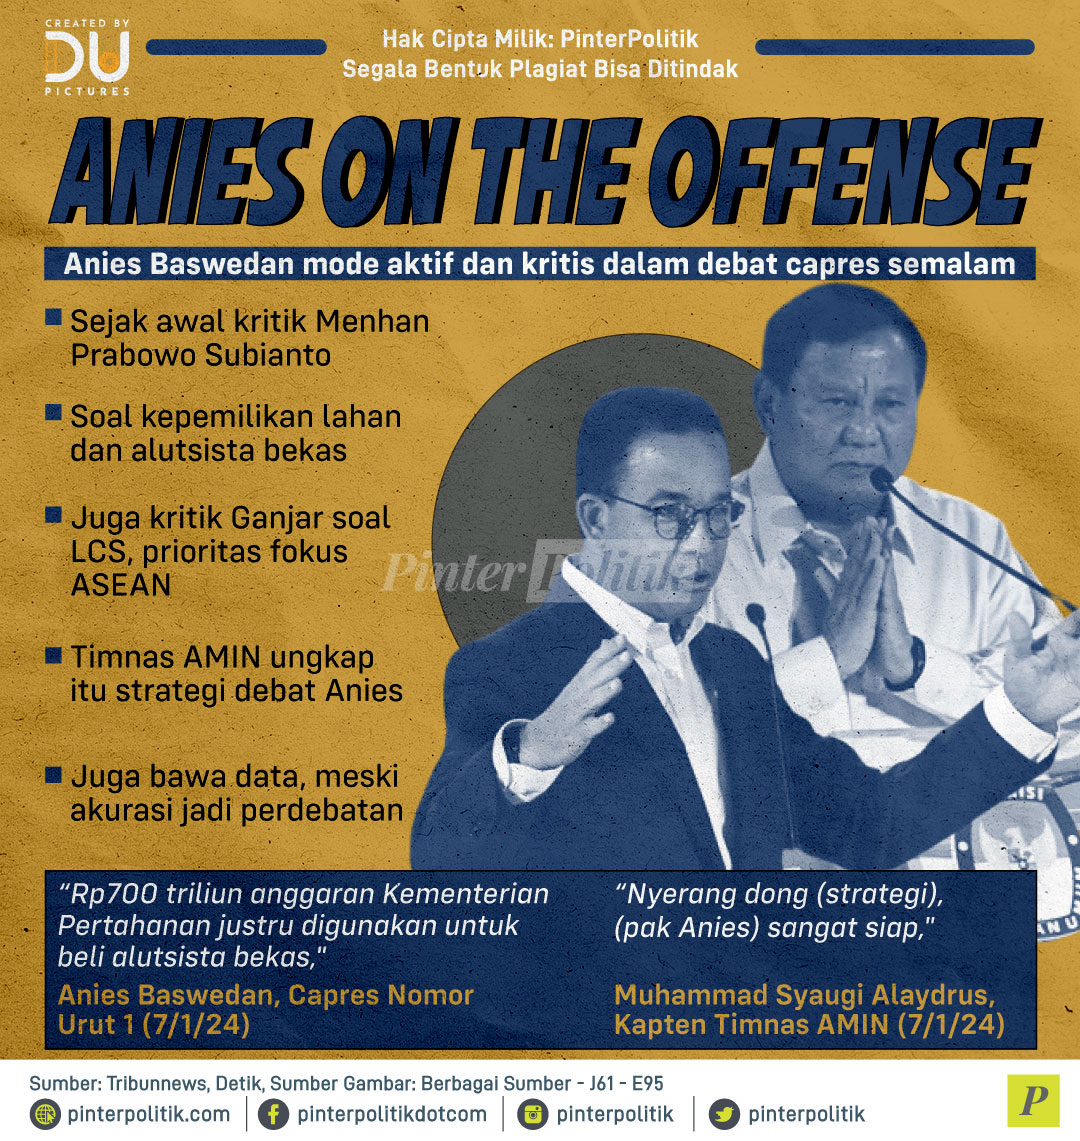 anies on the offense